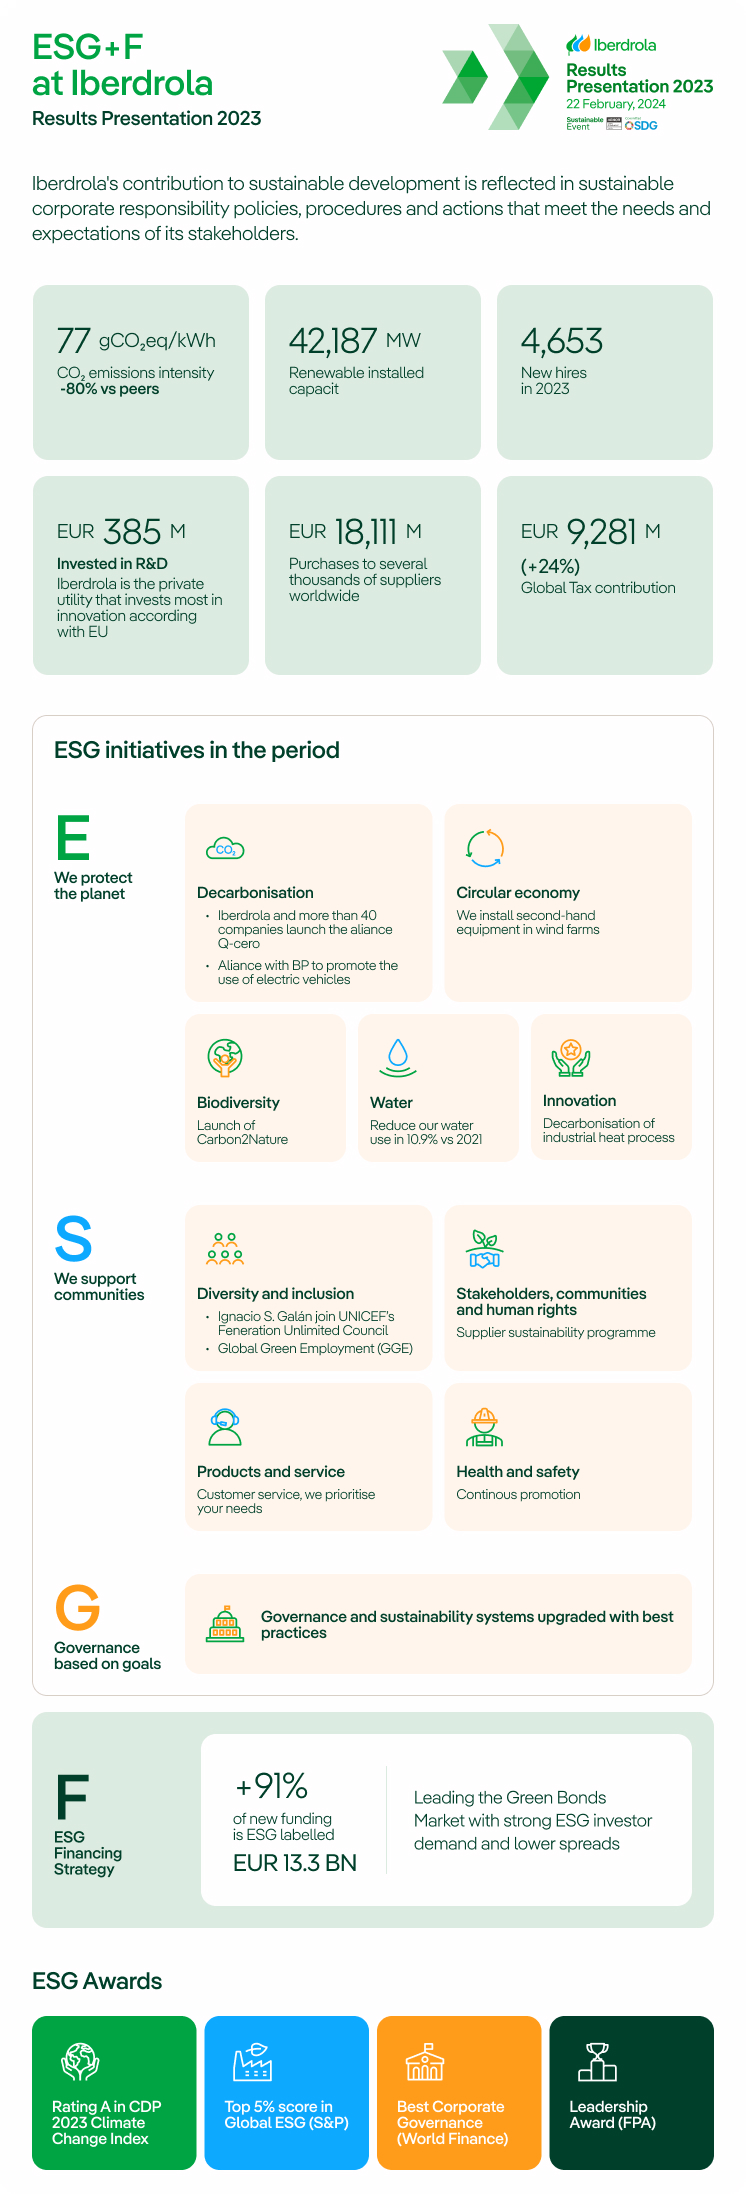 ESG+F at Iberdrola. Extracted from the Full Year 2023 Results Presentation